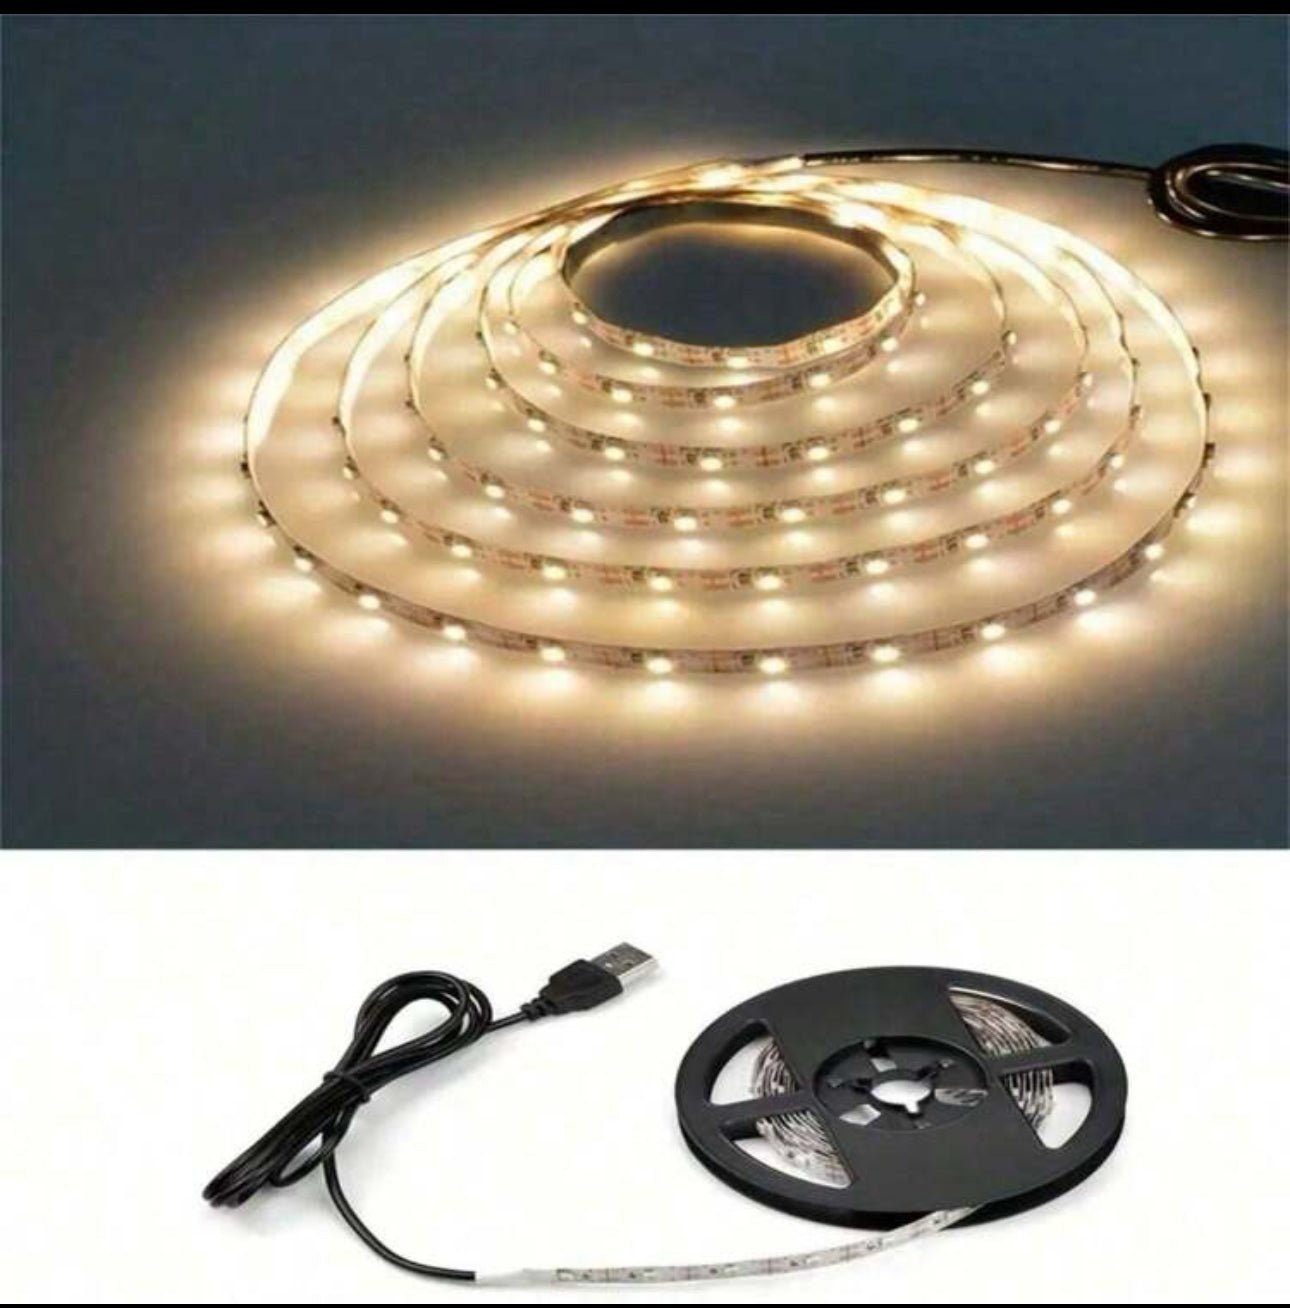 Usb Modern Decorative Yellow Led Light For Home. - BusDeals